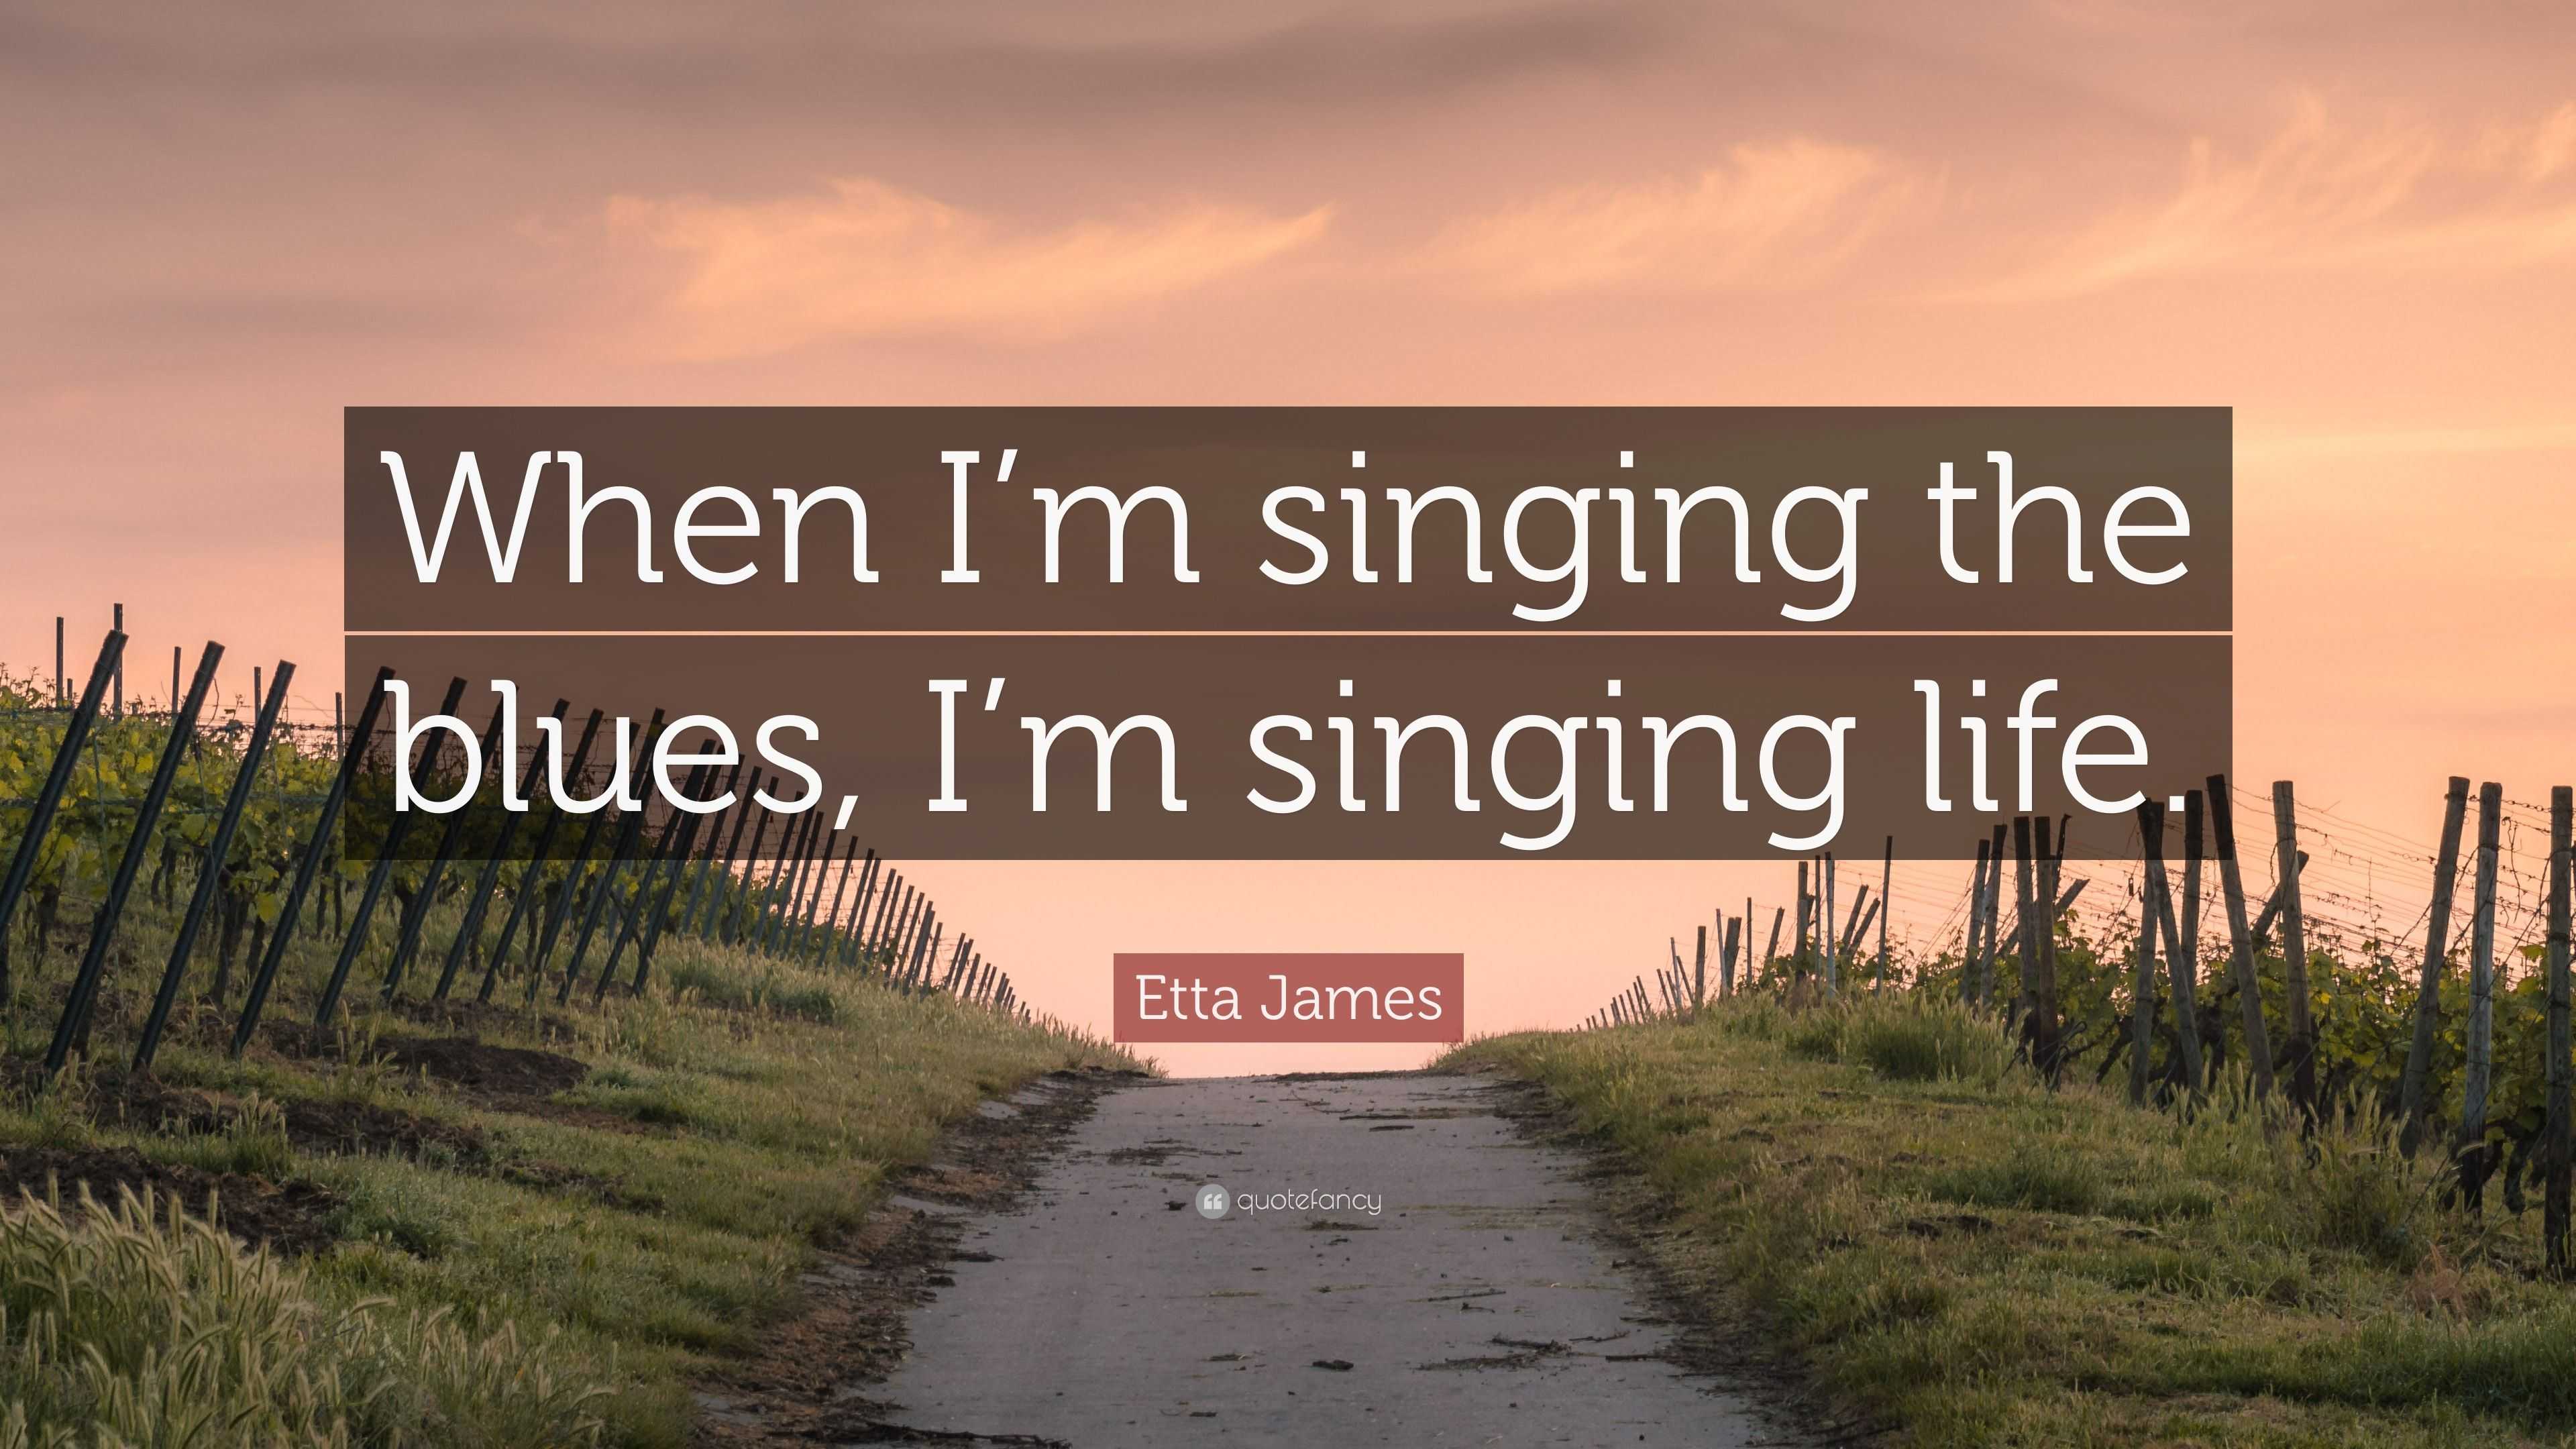 Etta James Quote: “When I’m singing the blues, I’m singing life.”